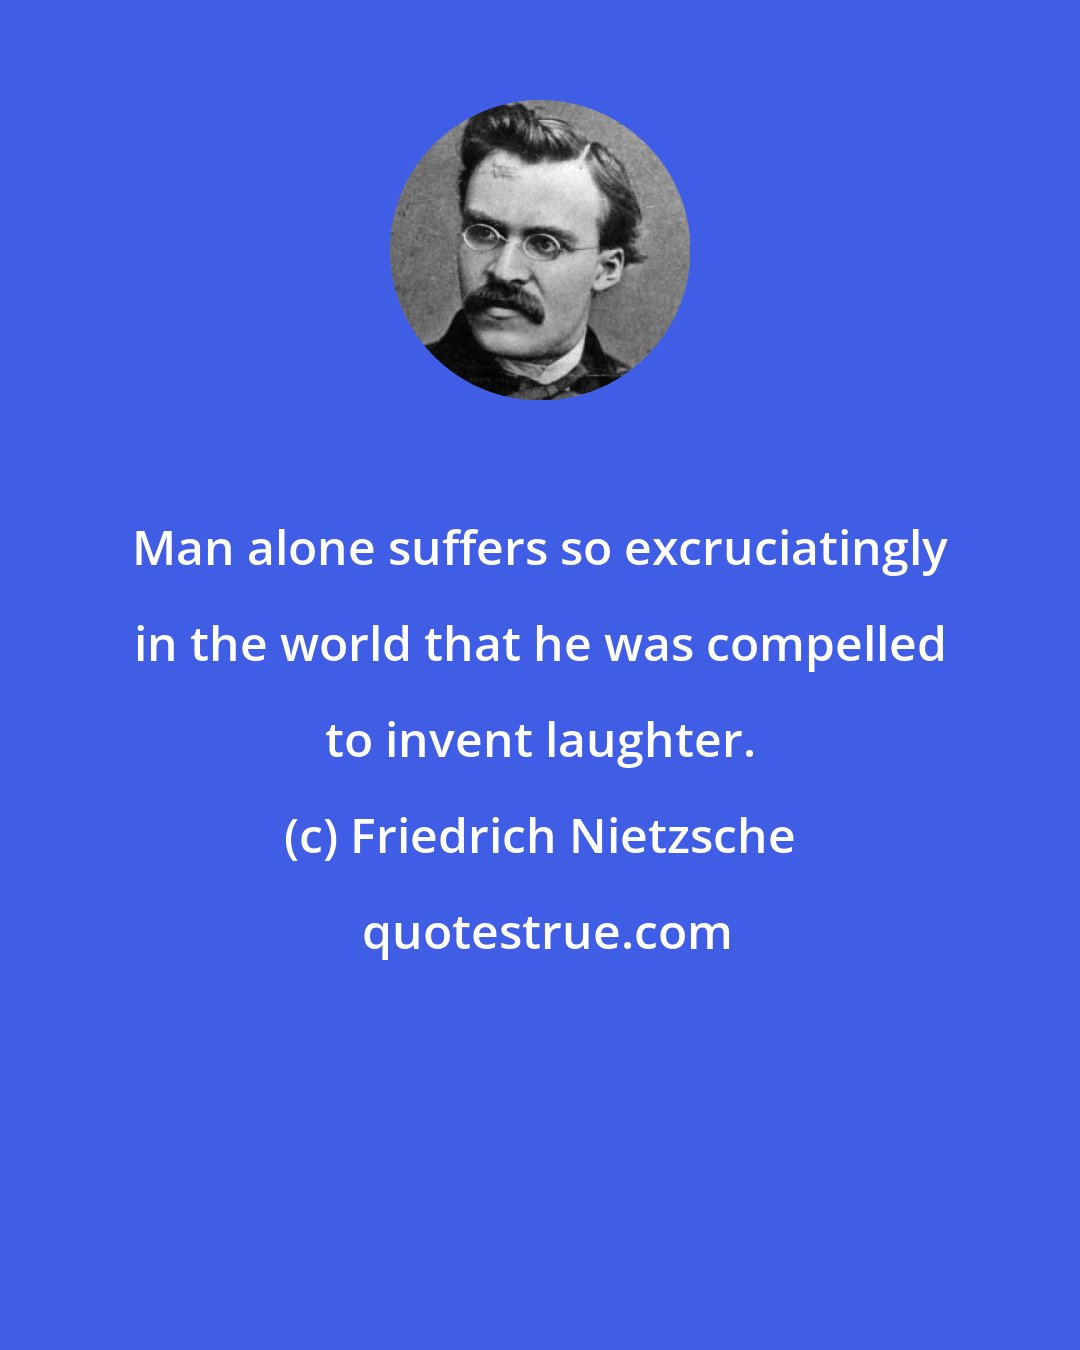 Friedrich Nietzsche: Man alone suffers so excruciatingly in the world that he was compelled to invent laughter.